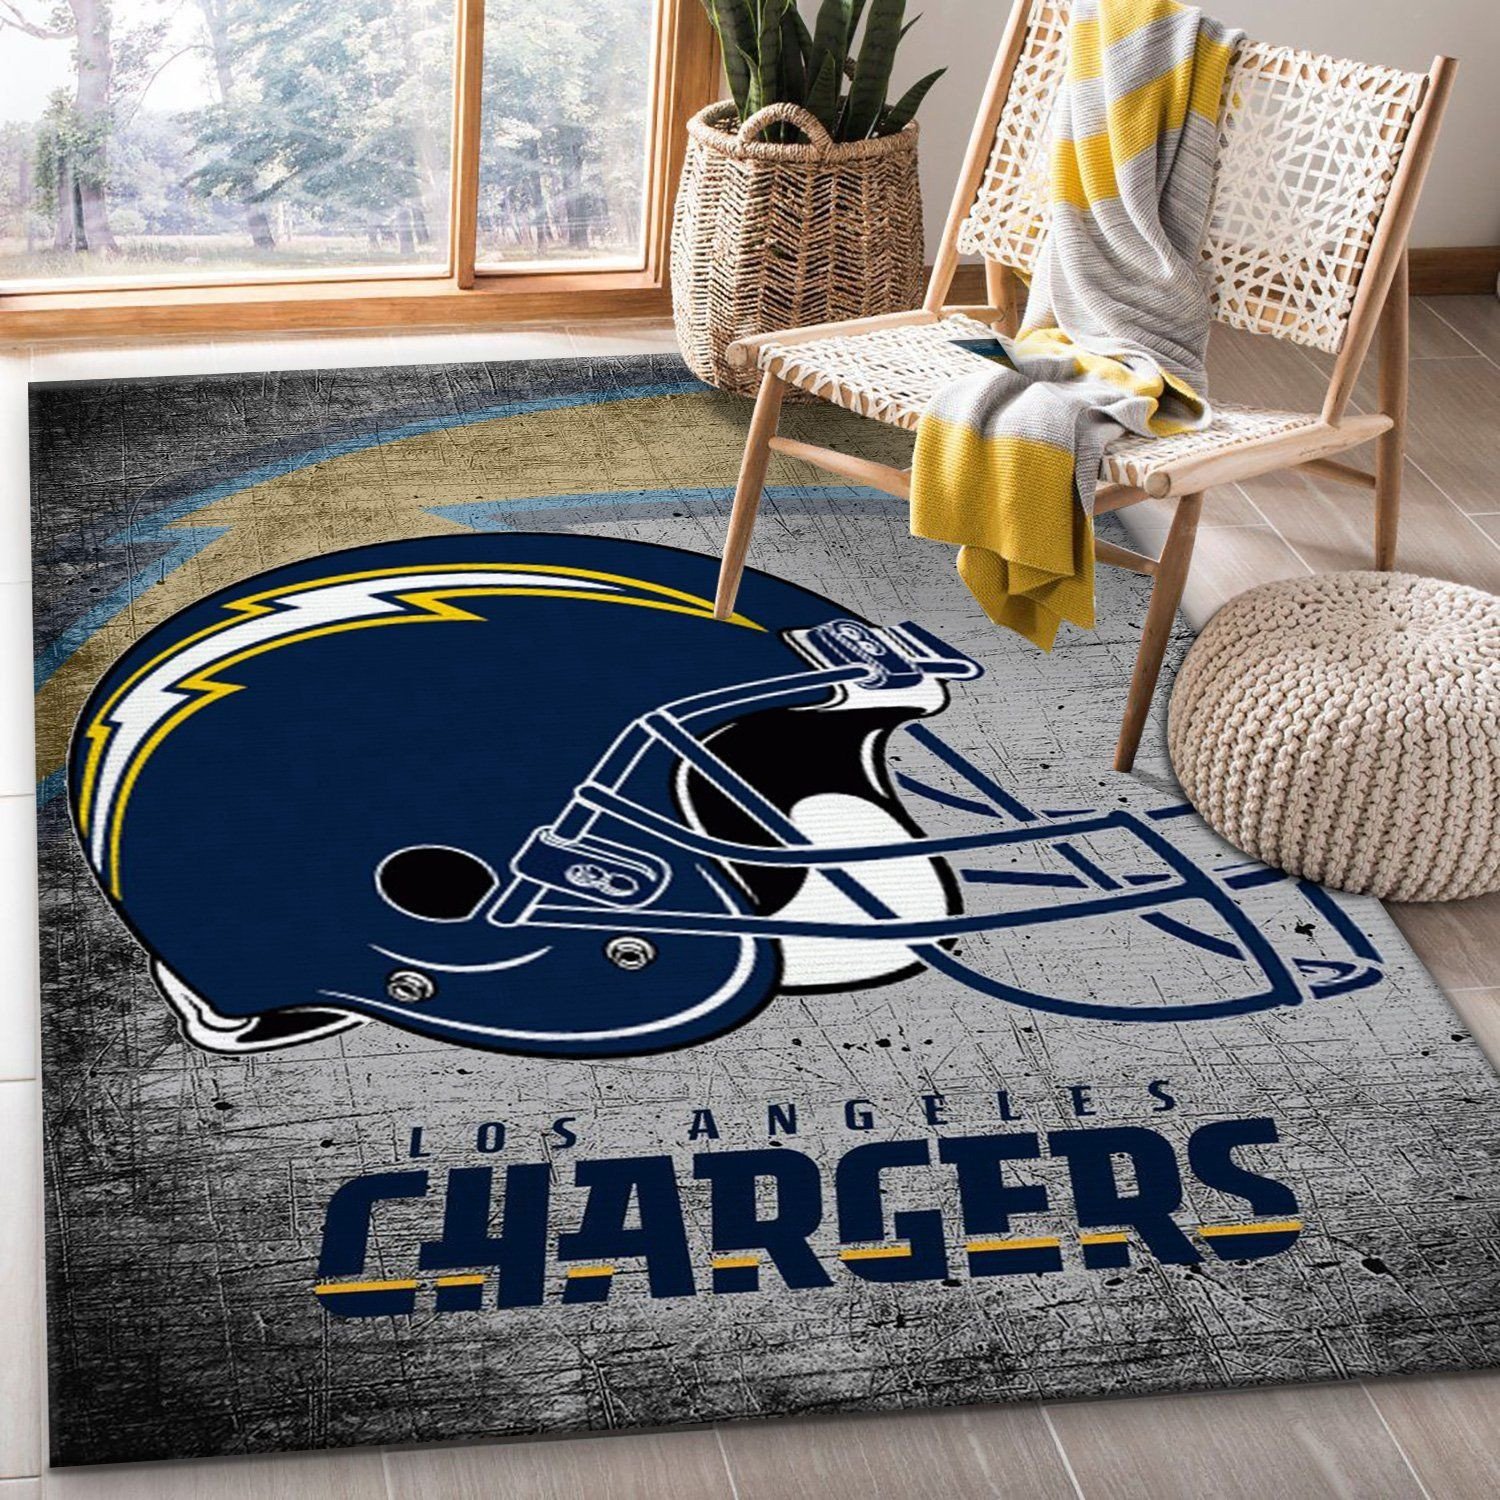 Los Angeles Chargers Nfl Rug Living Room Rug Home Decor Floor Decor - Indoor Outdoor Rugs 2